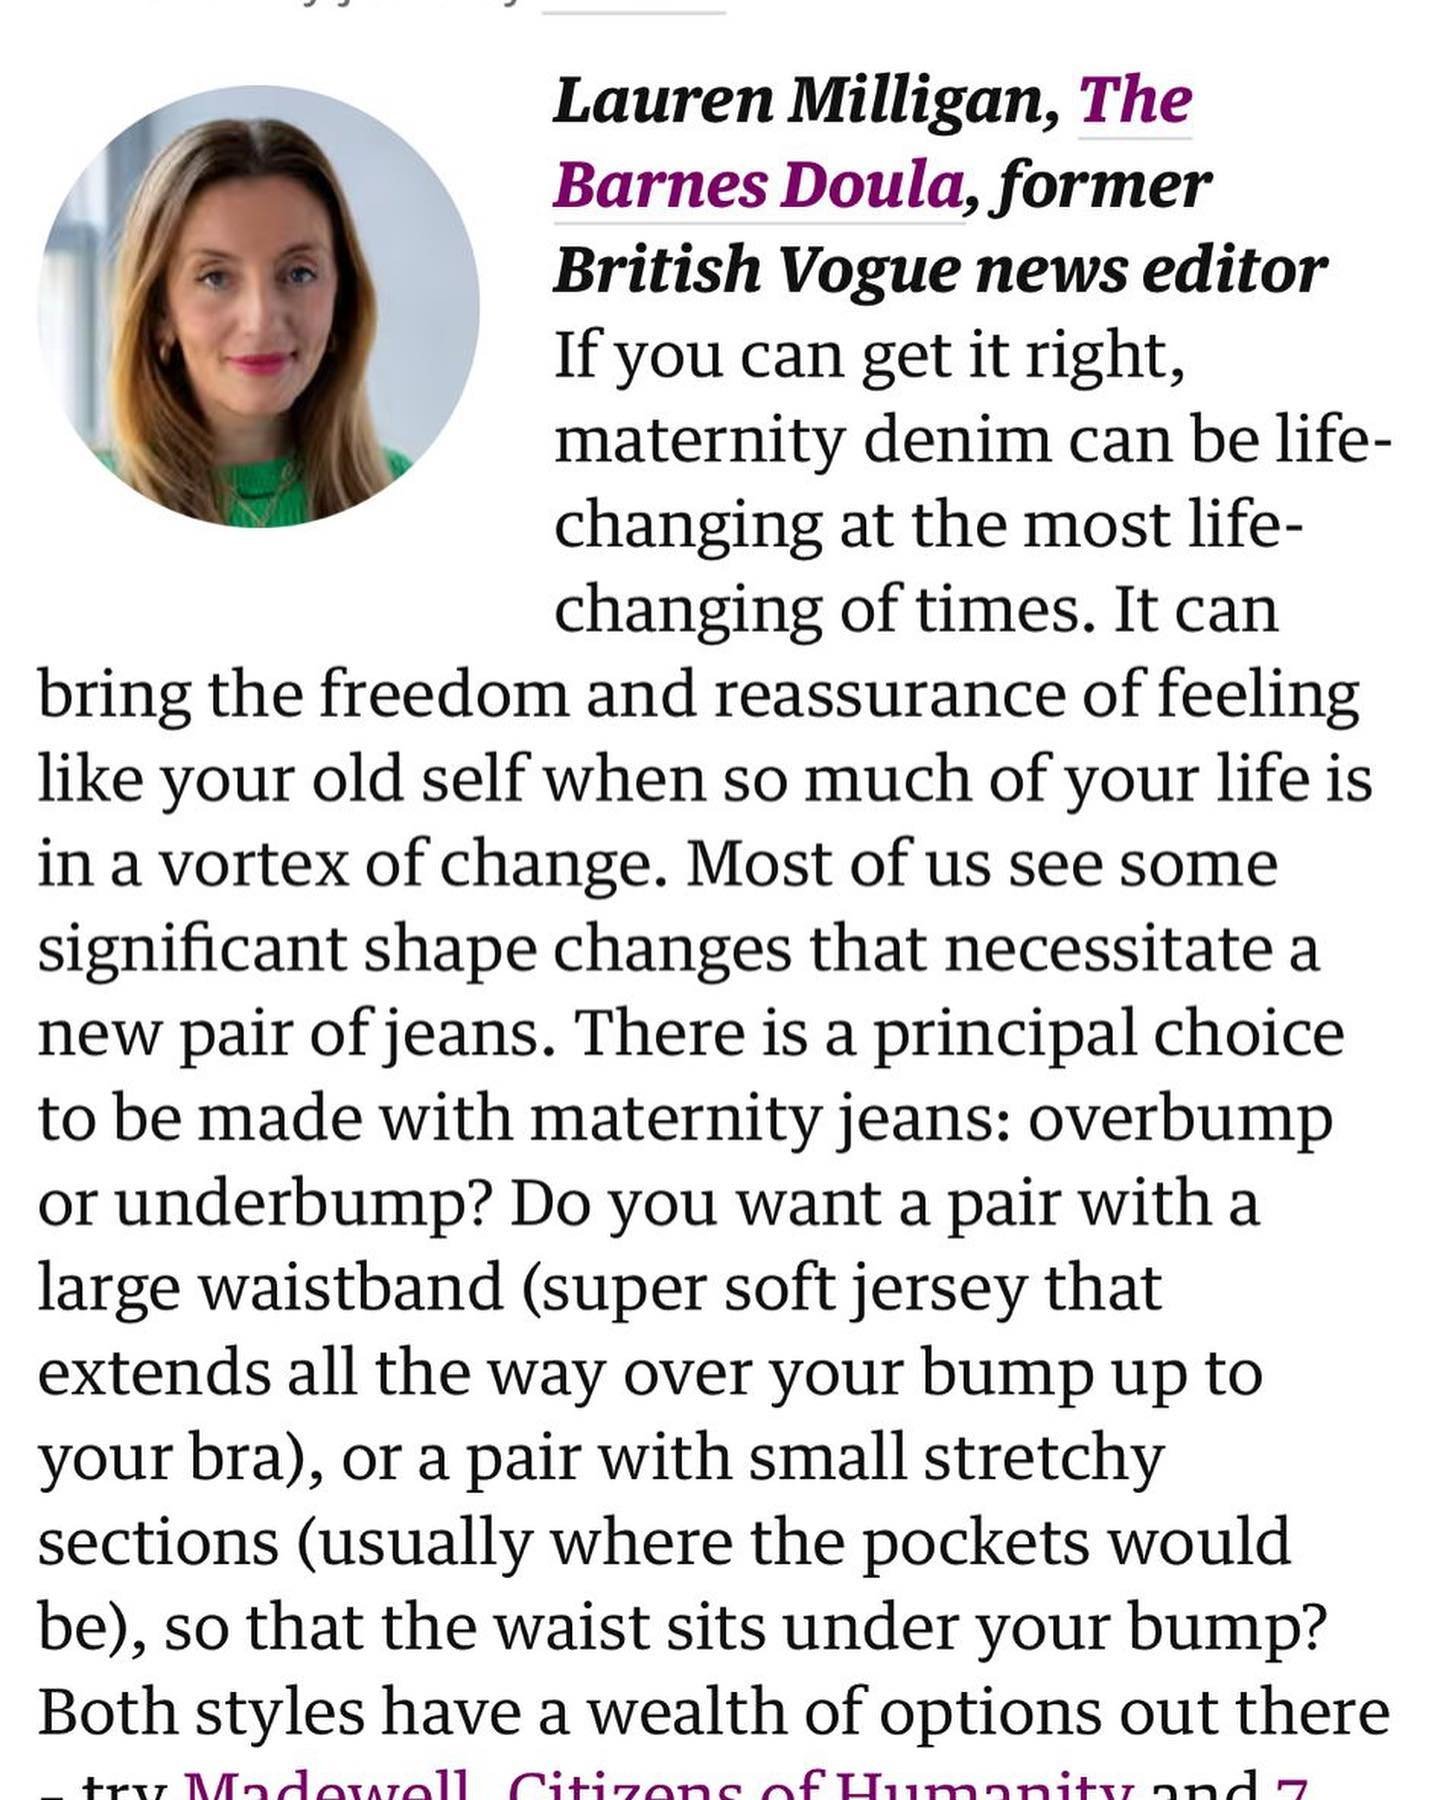 Delighted to be asked to contribute to today&rsquo;s @obsmagazine denim extravaganza, alongside very illustrious company; merging my two worlds with my two cents on maternity denim. 

I&rsquo;m Team #underbump if you were wondering. 

Thanks to my da